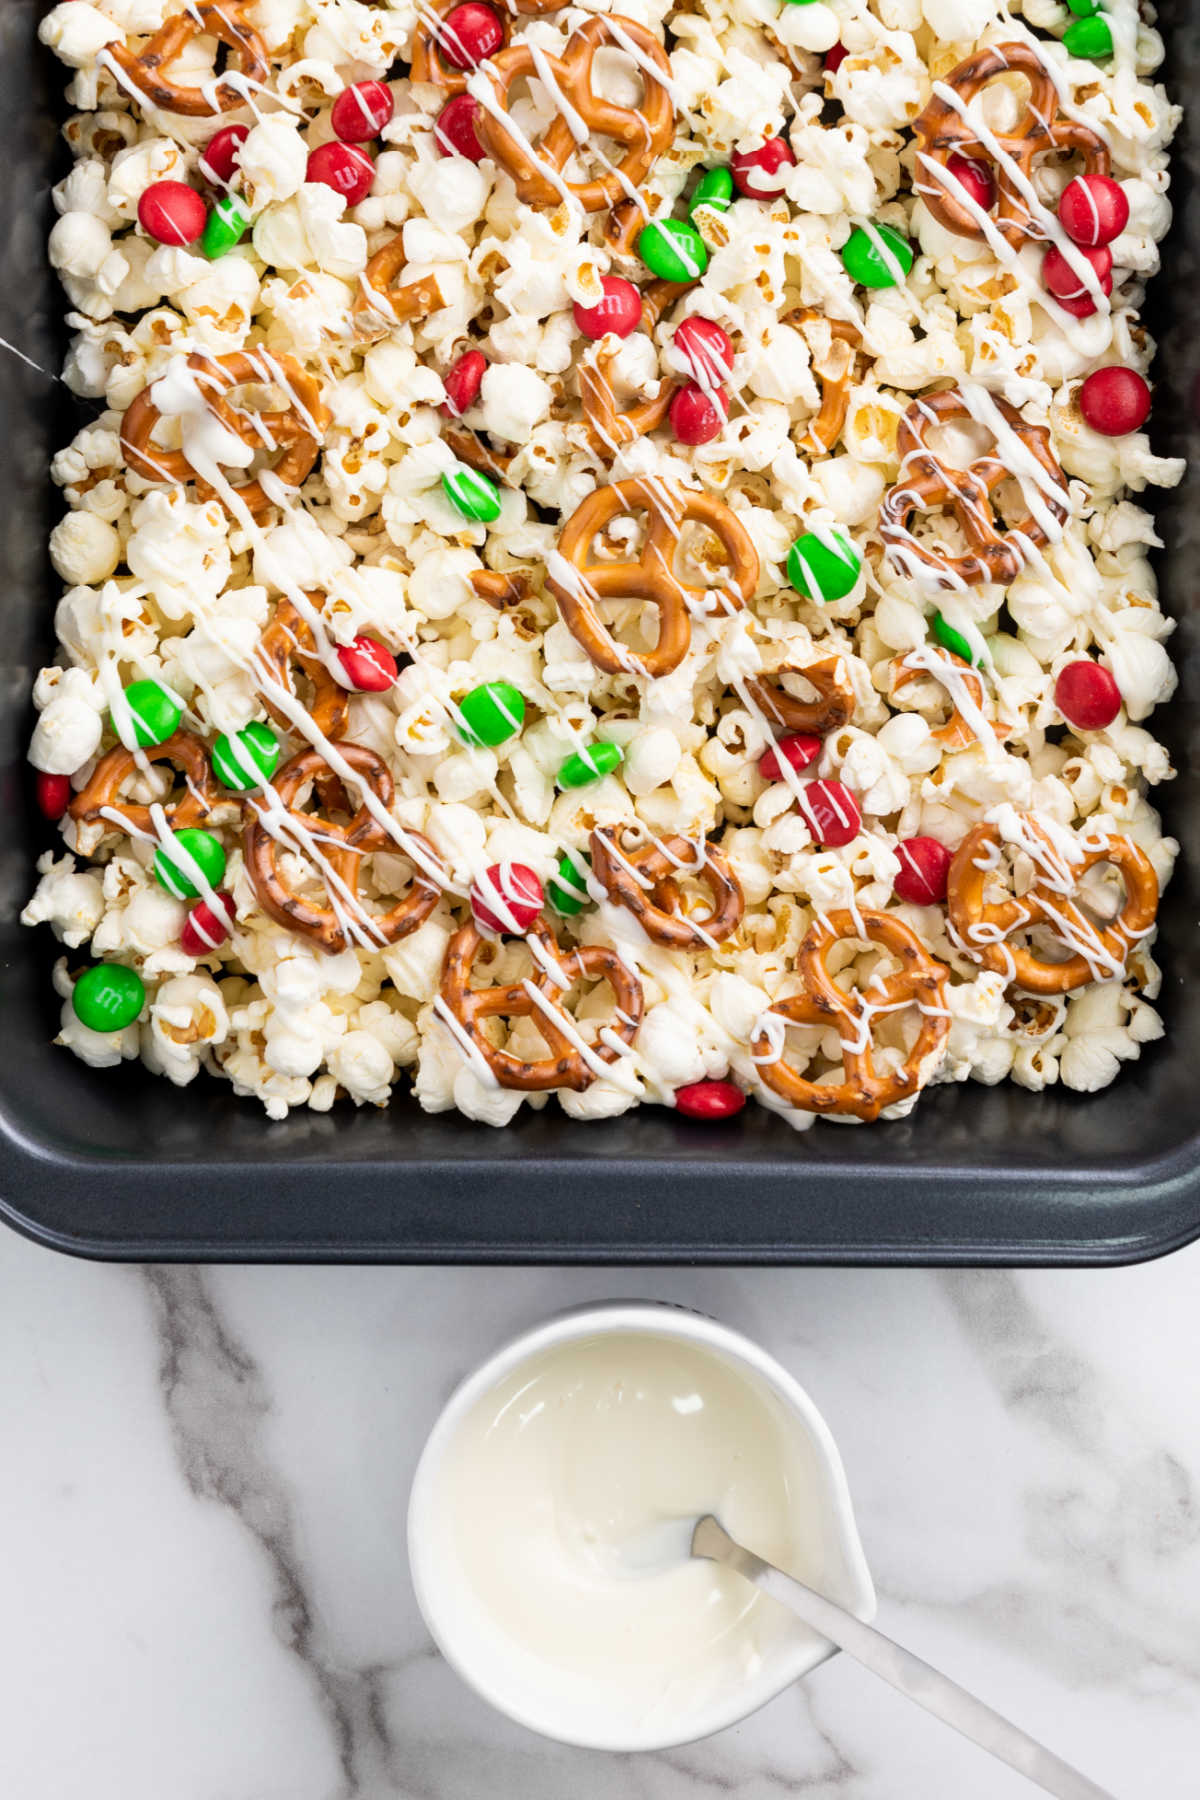 Drizzling melted white chocolate over popcorn, pretzels and candies.